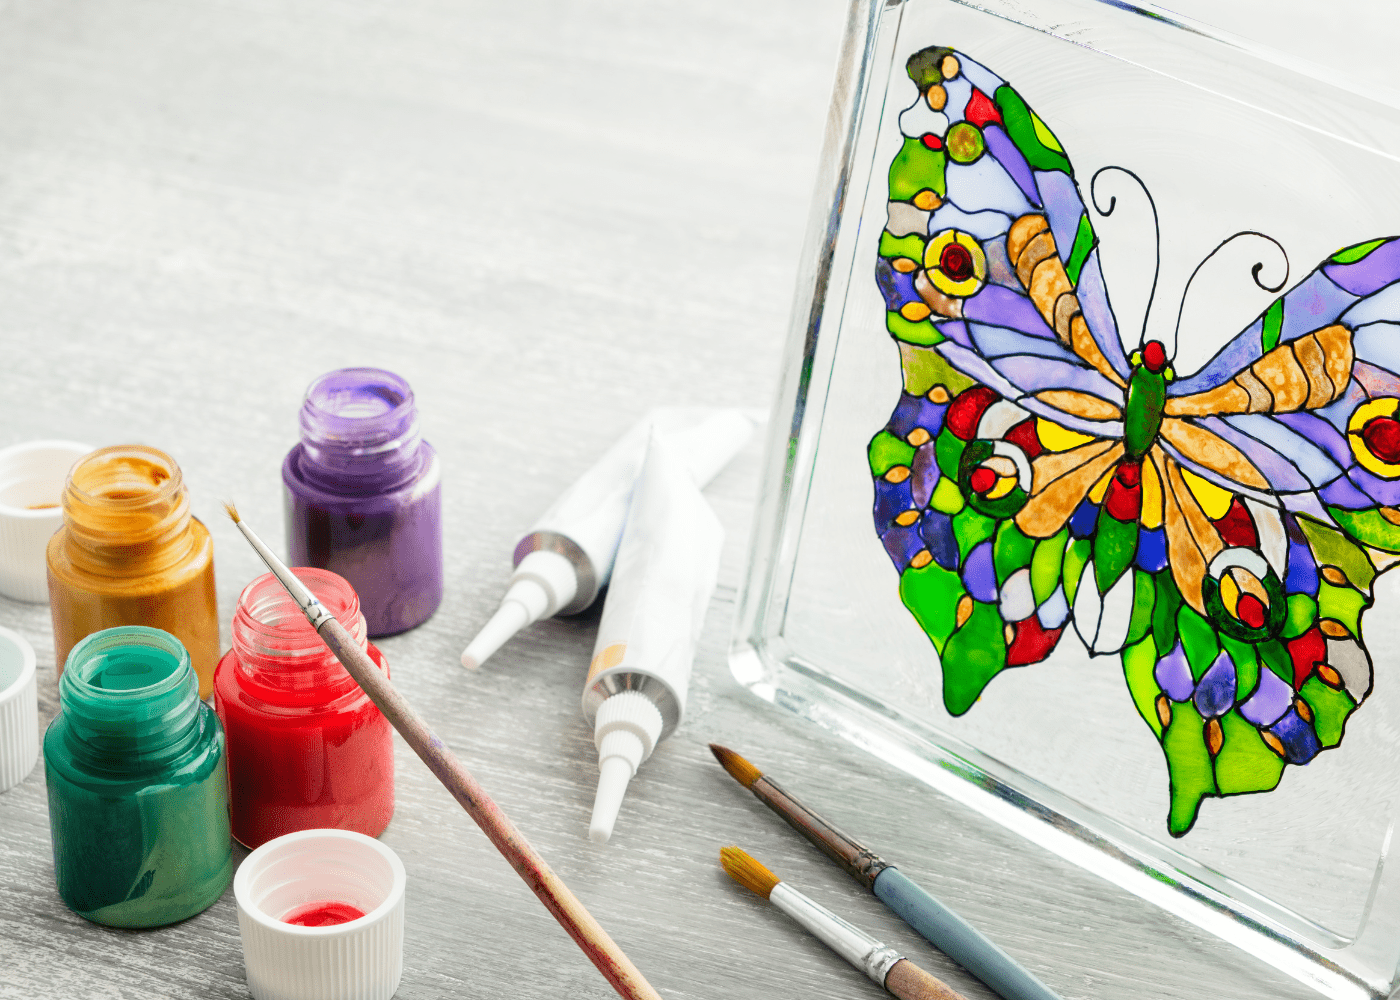 Photo of a stained glass butterfly on the right with the paints used, including gold, green, red, and purple.